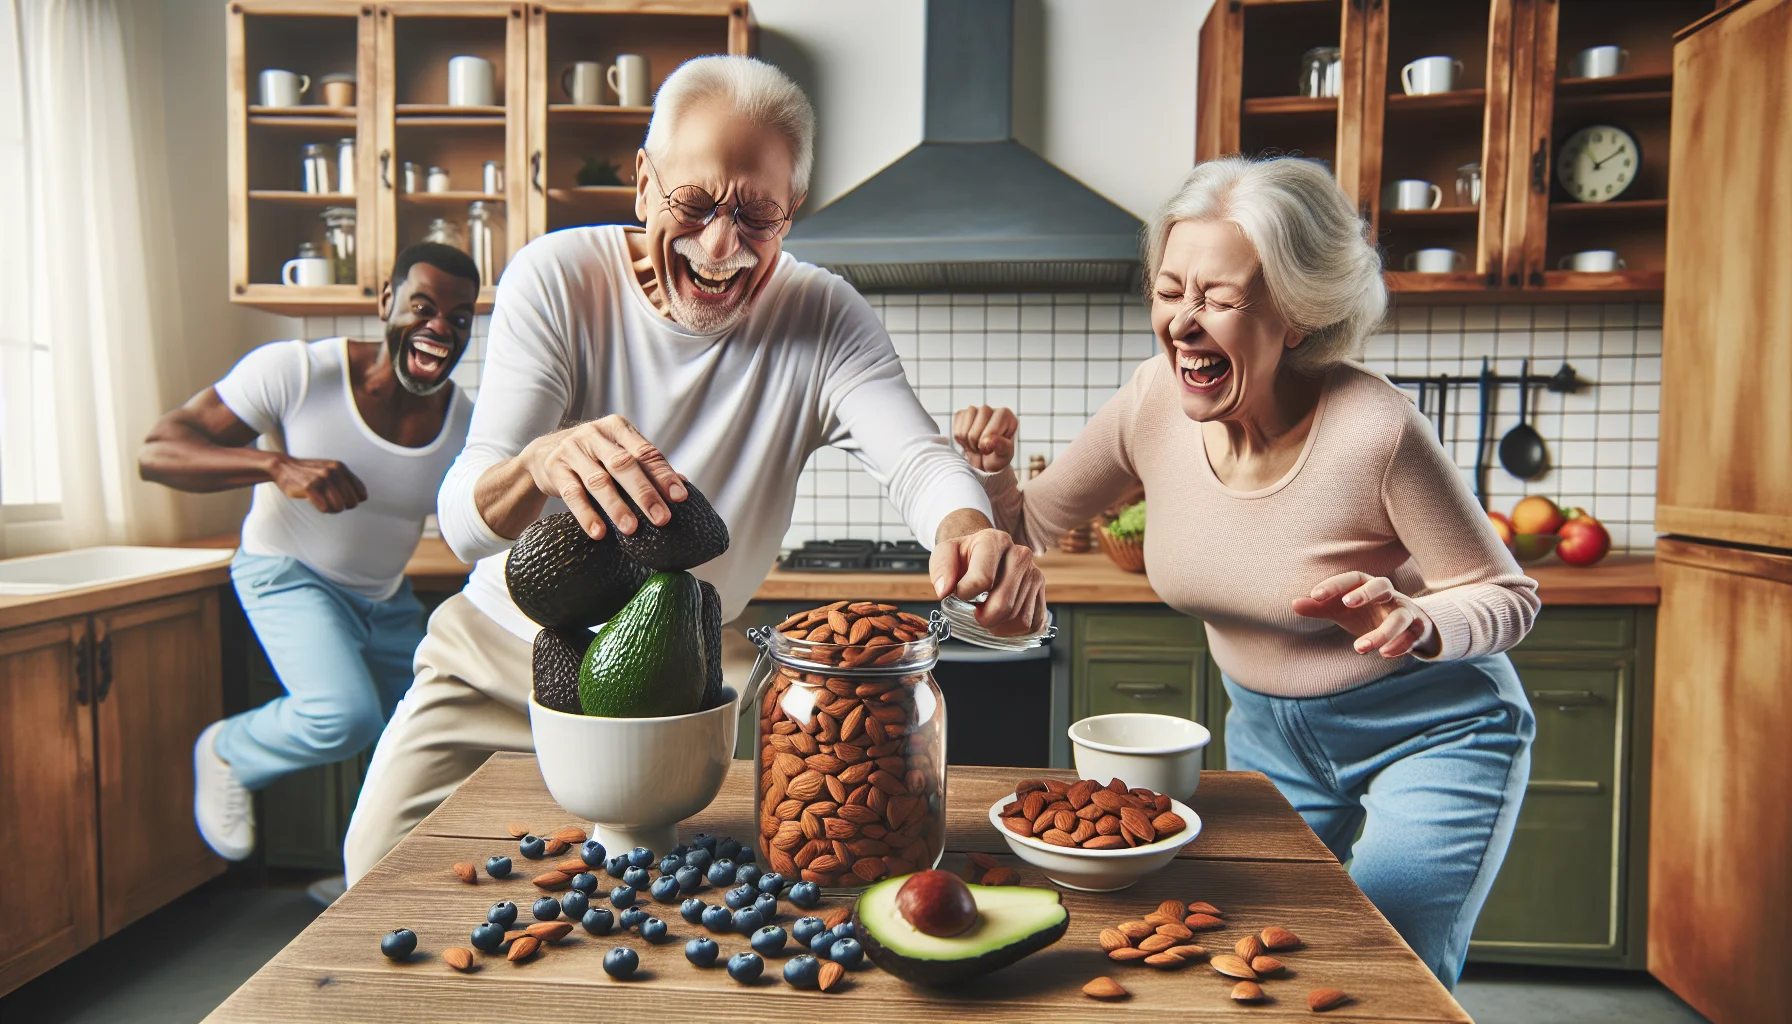 Create a humorous and realistic kitchen scene featuring a variety of high-fiber, low-carb breakfast foods. The setting includes an elderly Caucasian man struggling to open an overly large jar of almonds, a Middle-Eastern woman laughing as she tries to balance a tower of avocados on a small plate, and a black man grinning as he chases an oversize blueberry around the room. Make sure the atmosphere is playful, suggesting the fun side of following a healthy diet in their golden years.